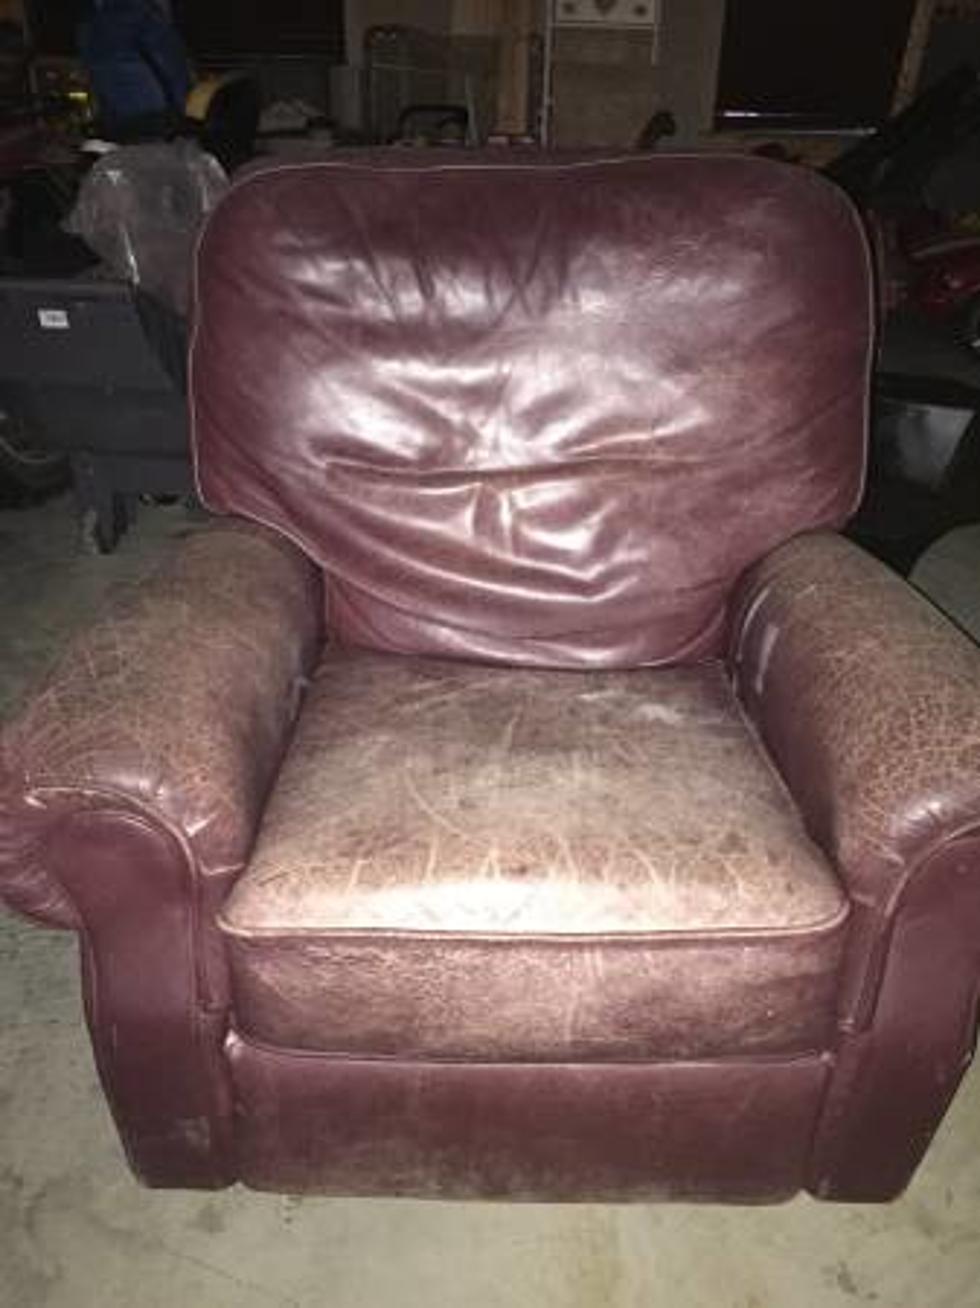 Free Stuff in East Texas Includes Furniture, Puppies, and Hog Bait